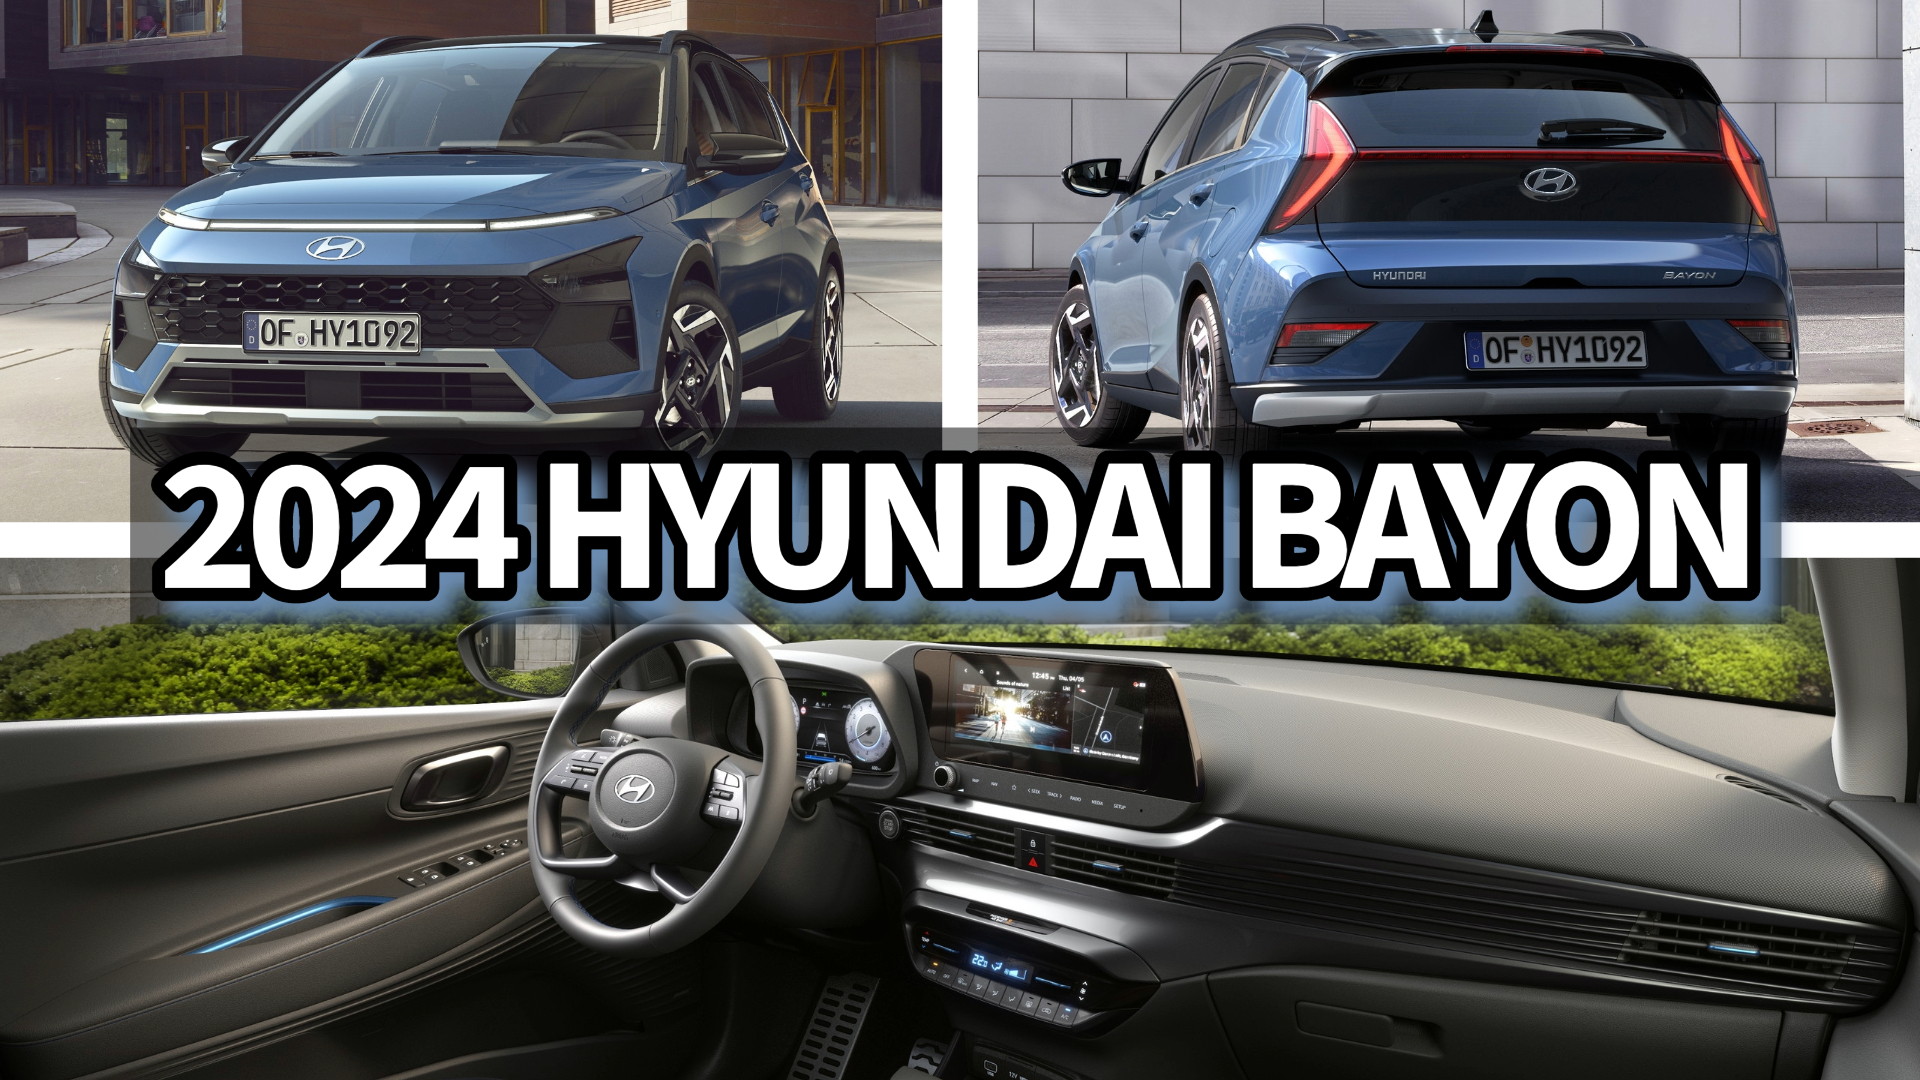 Hyundai BAYON: the all new SUV-crossover to watch out for